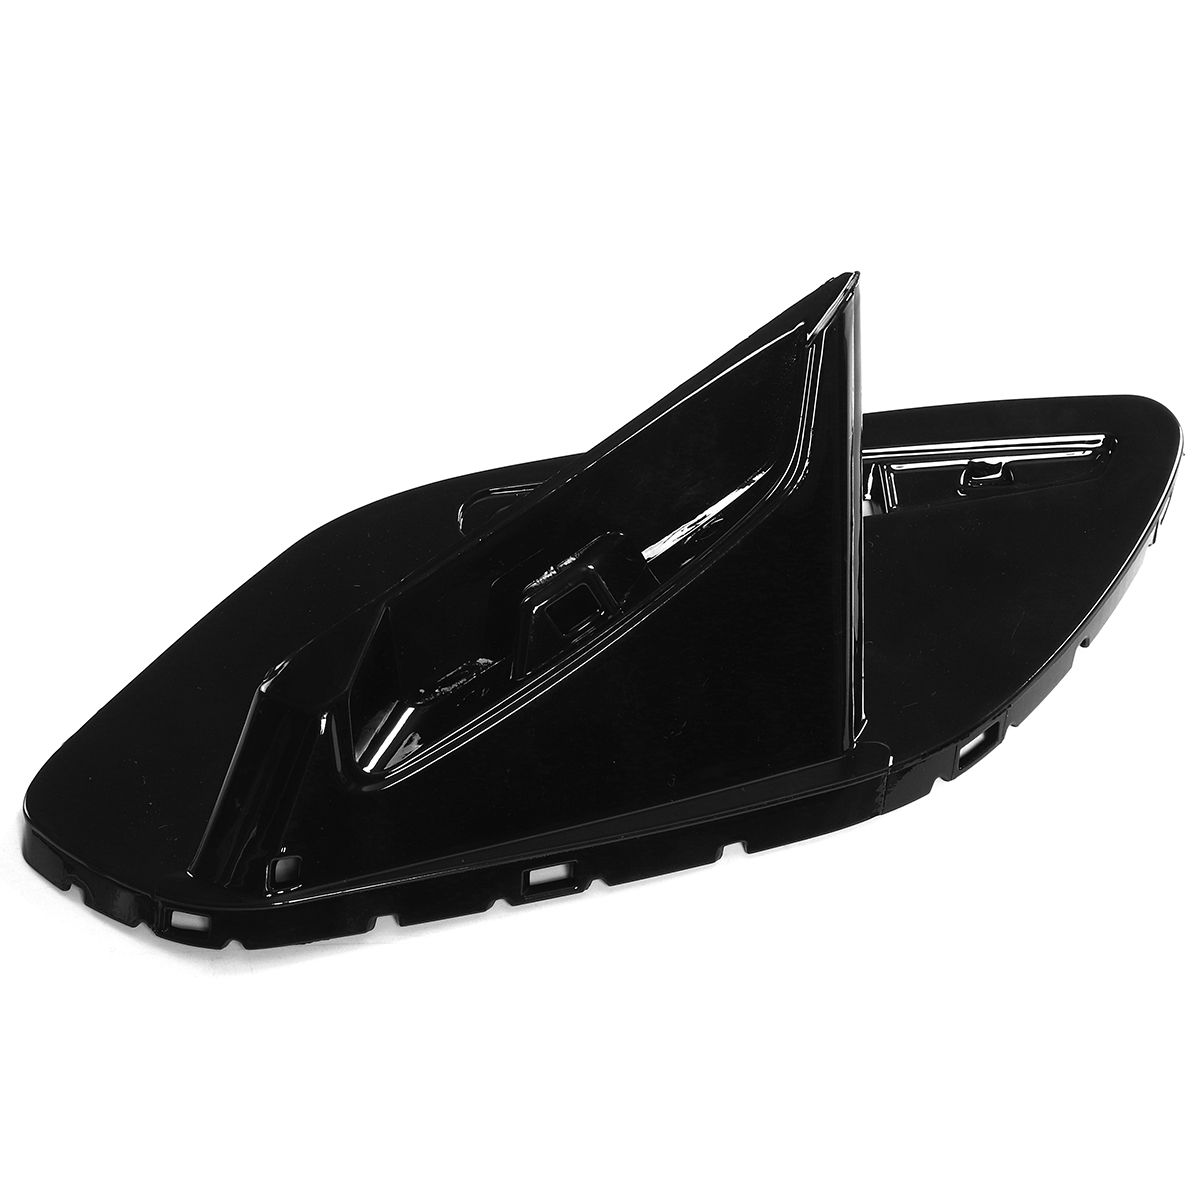 Car-Rear-Trunk-Glossy-Painted-Air-Splitter-Spoiler-Wing-For-Mercedes-Benz-A-Class-W177-A35-A180-A200-1615214